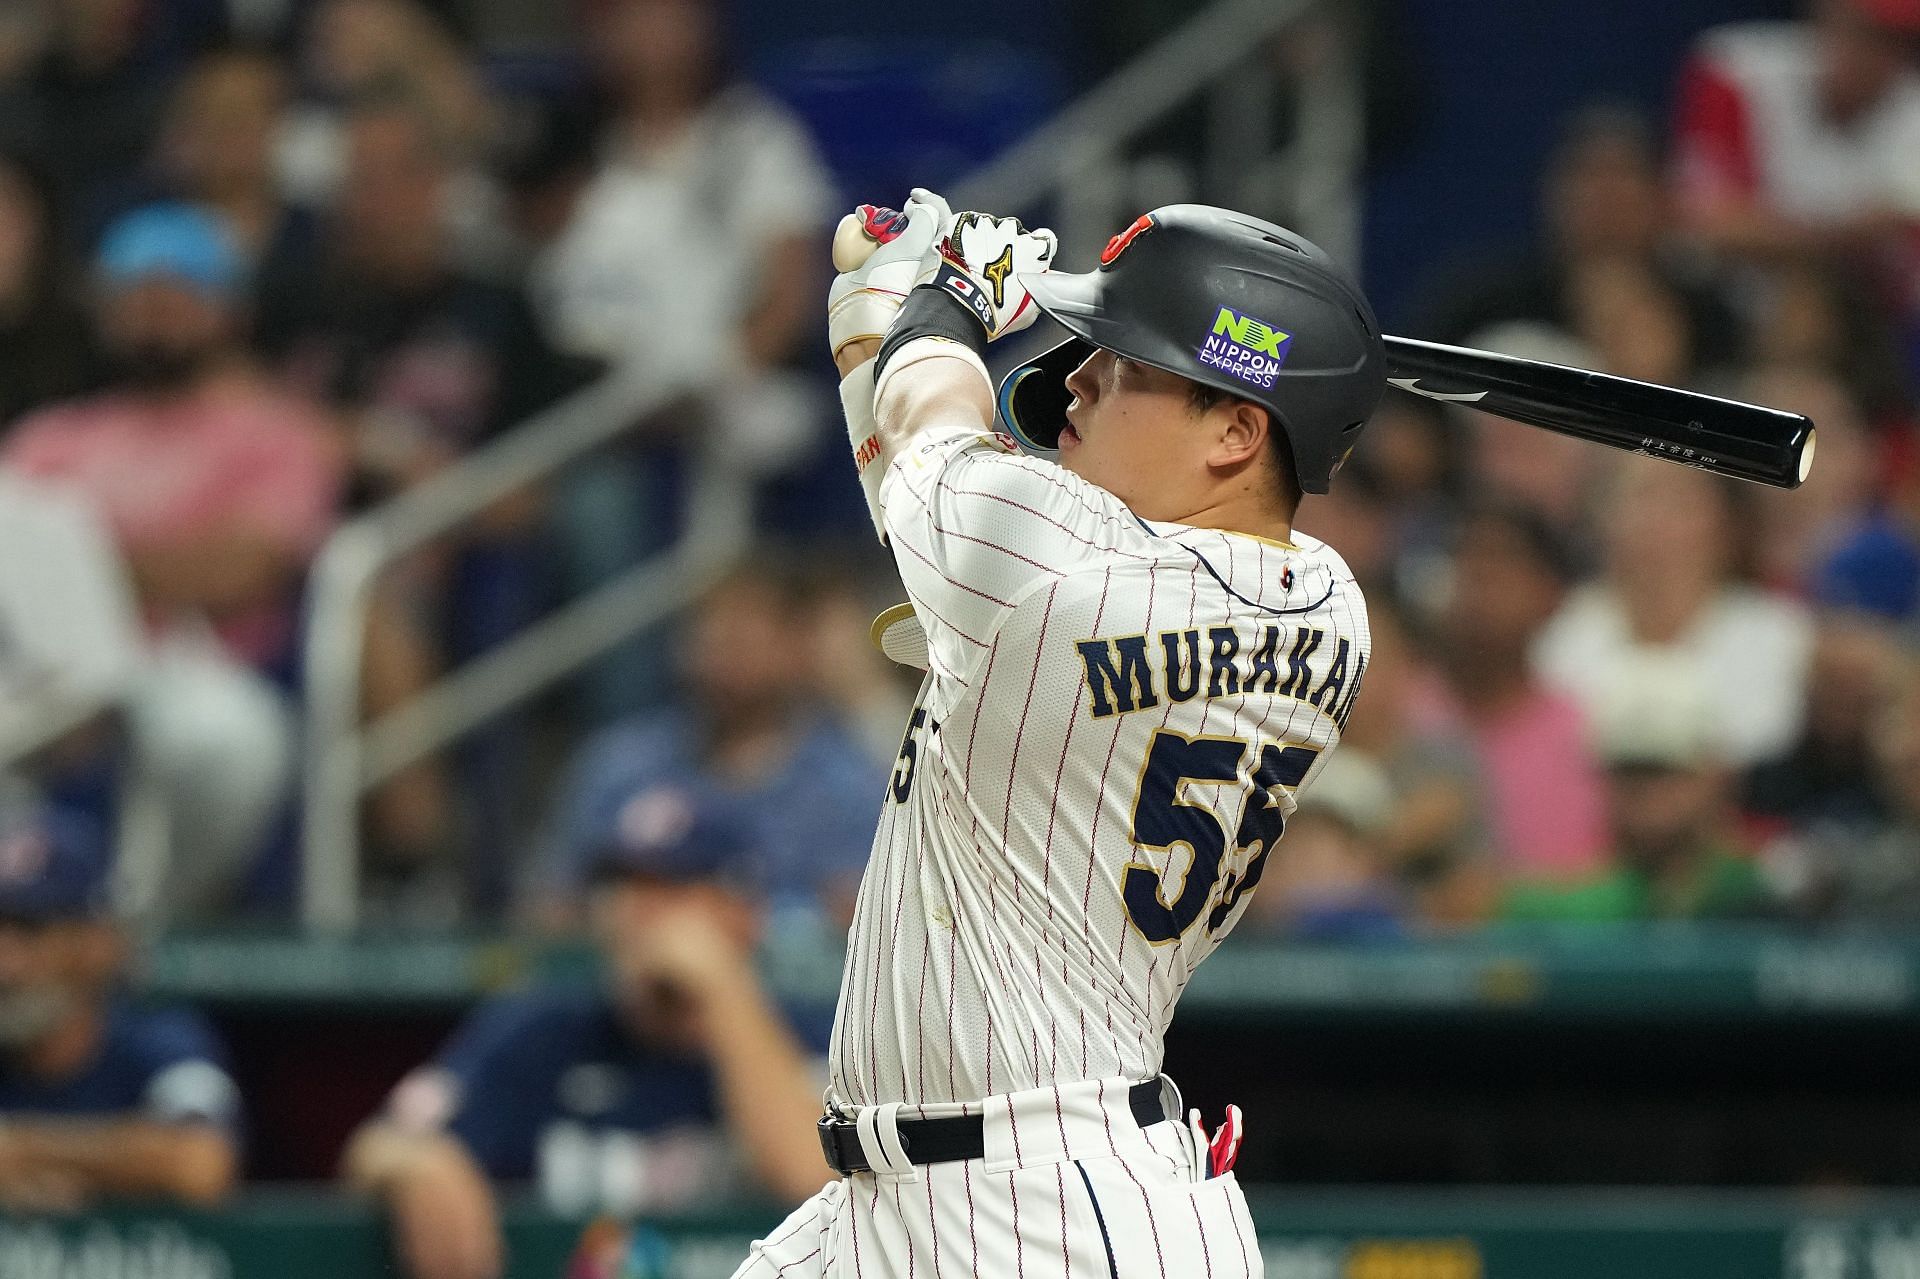 MLB Free Agency Rumors: Top 3 Japanese players who could make the